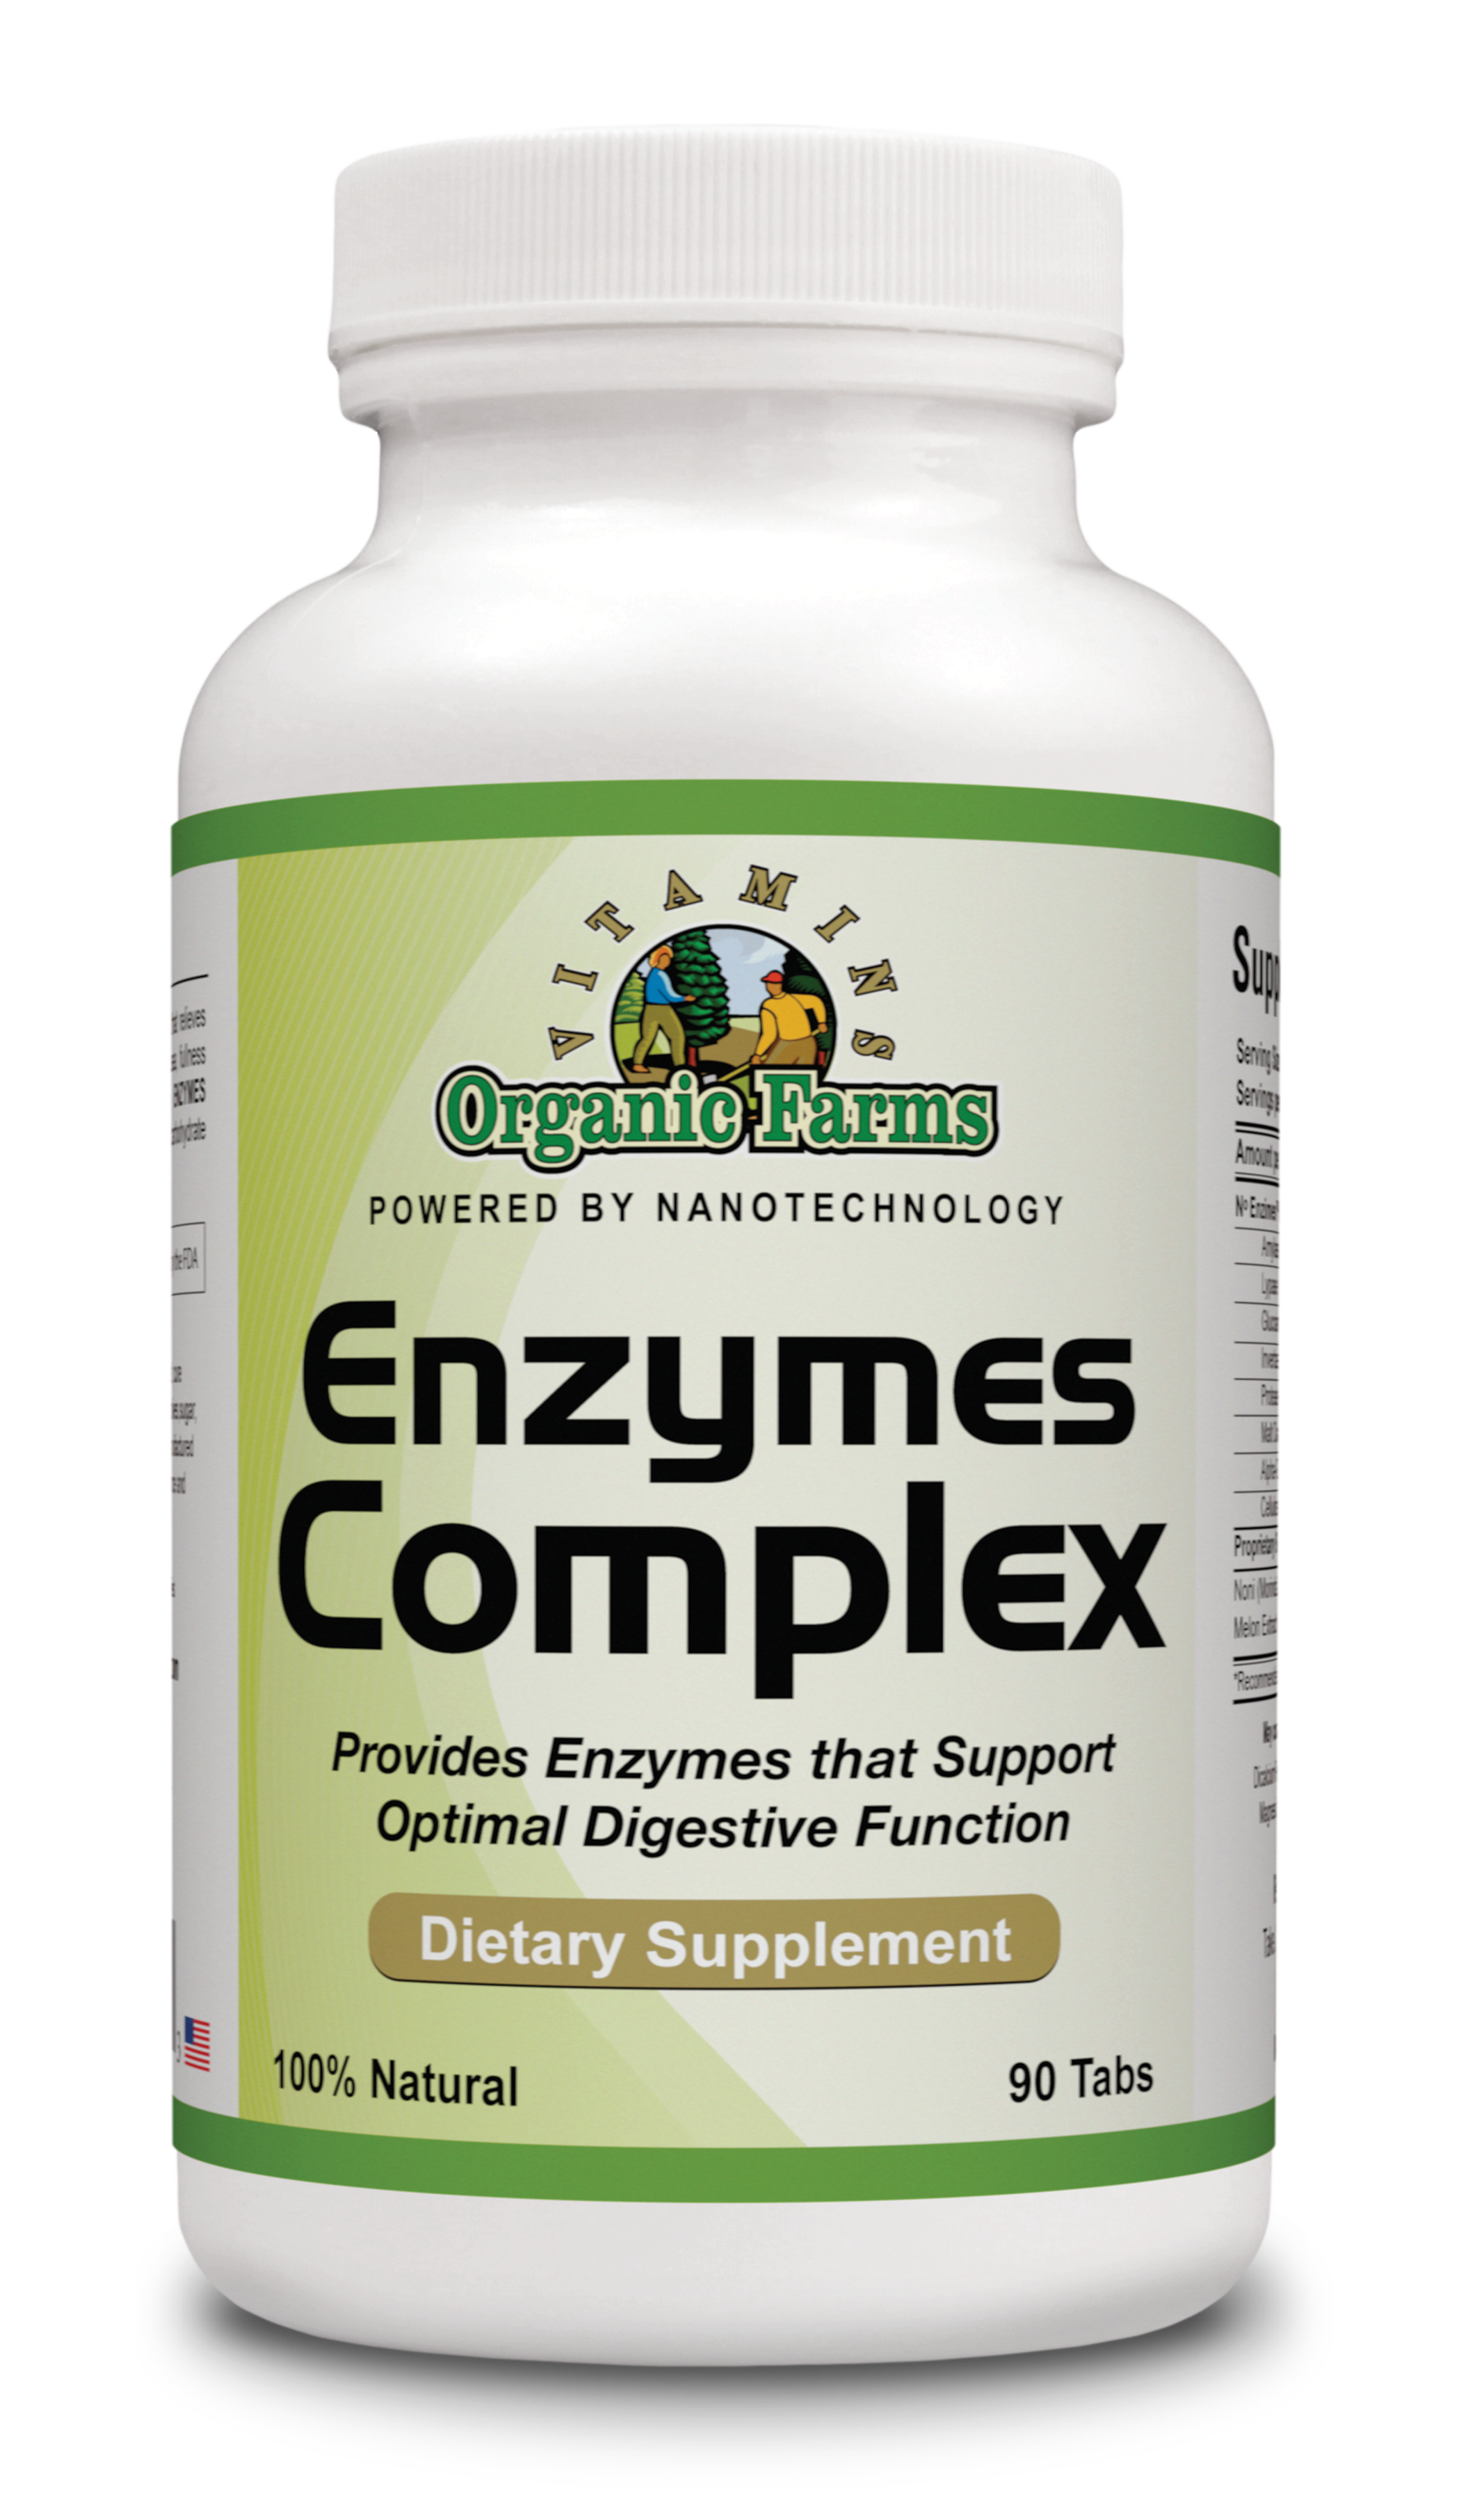 Enzymes Complex